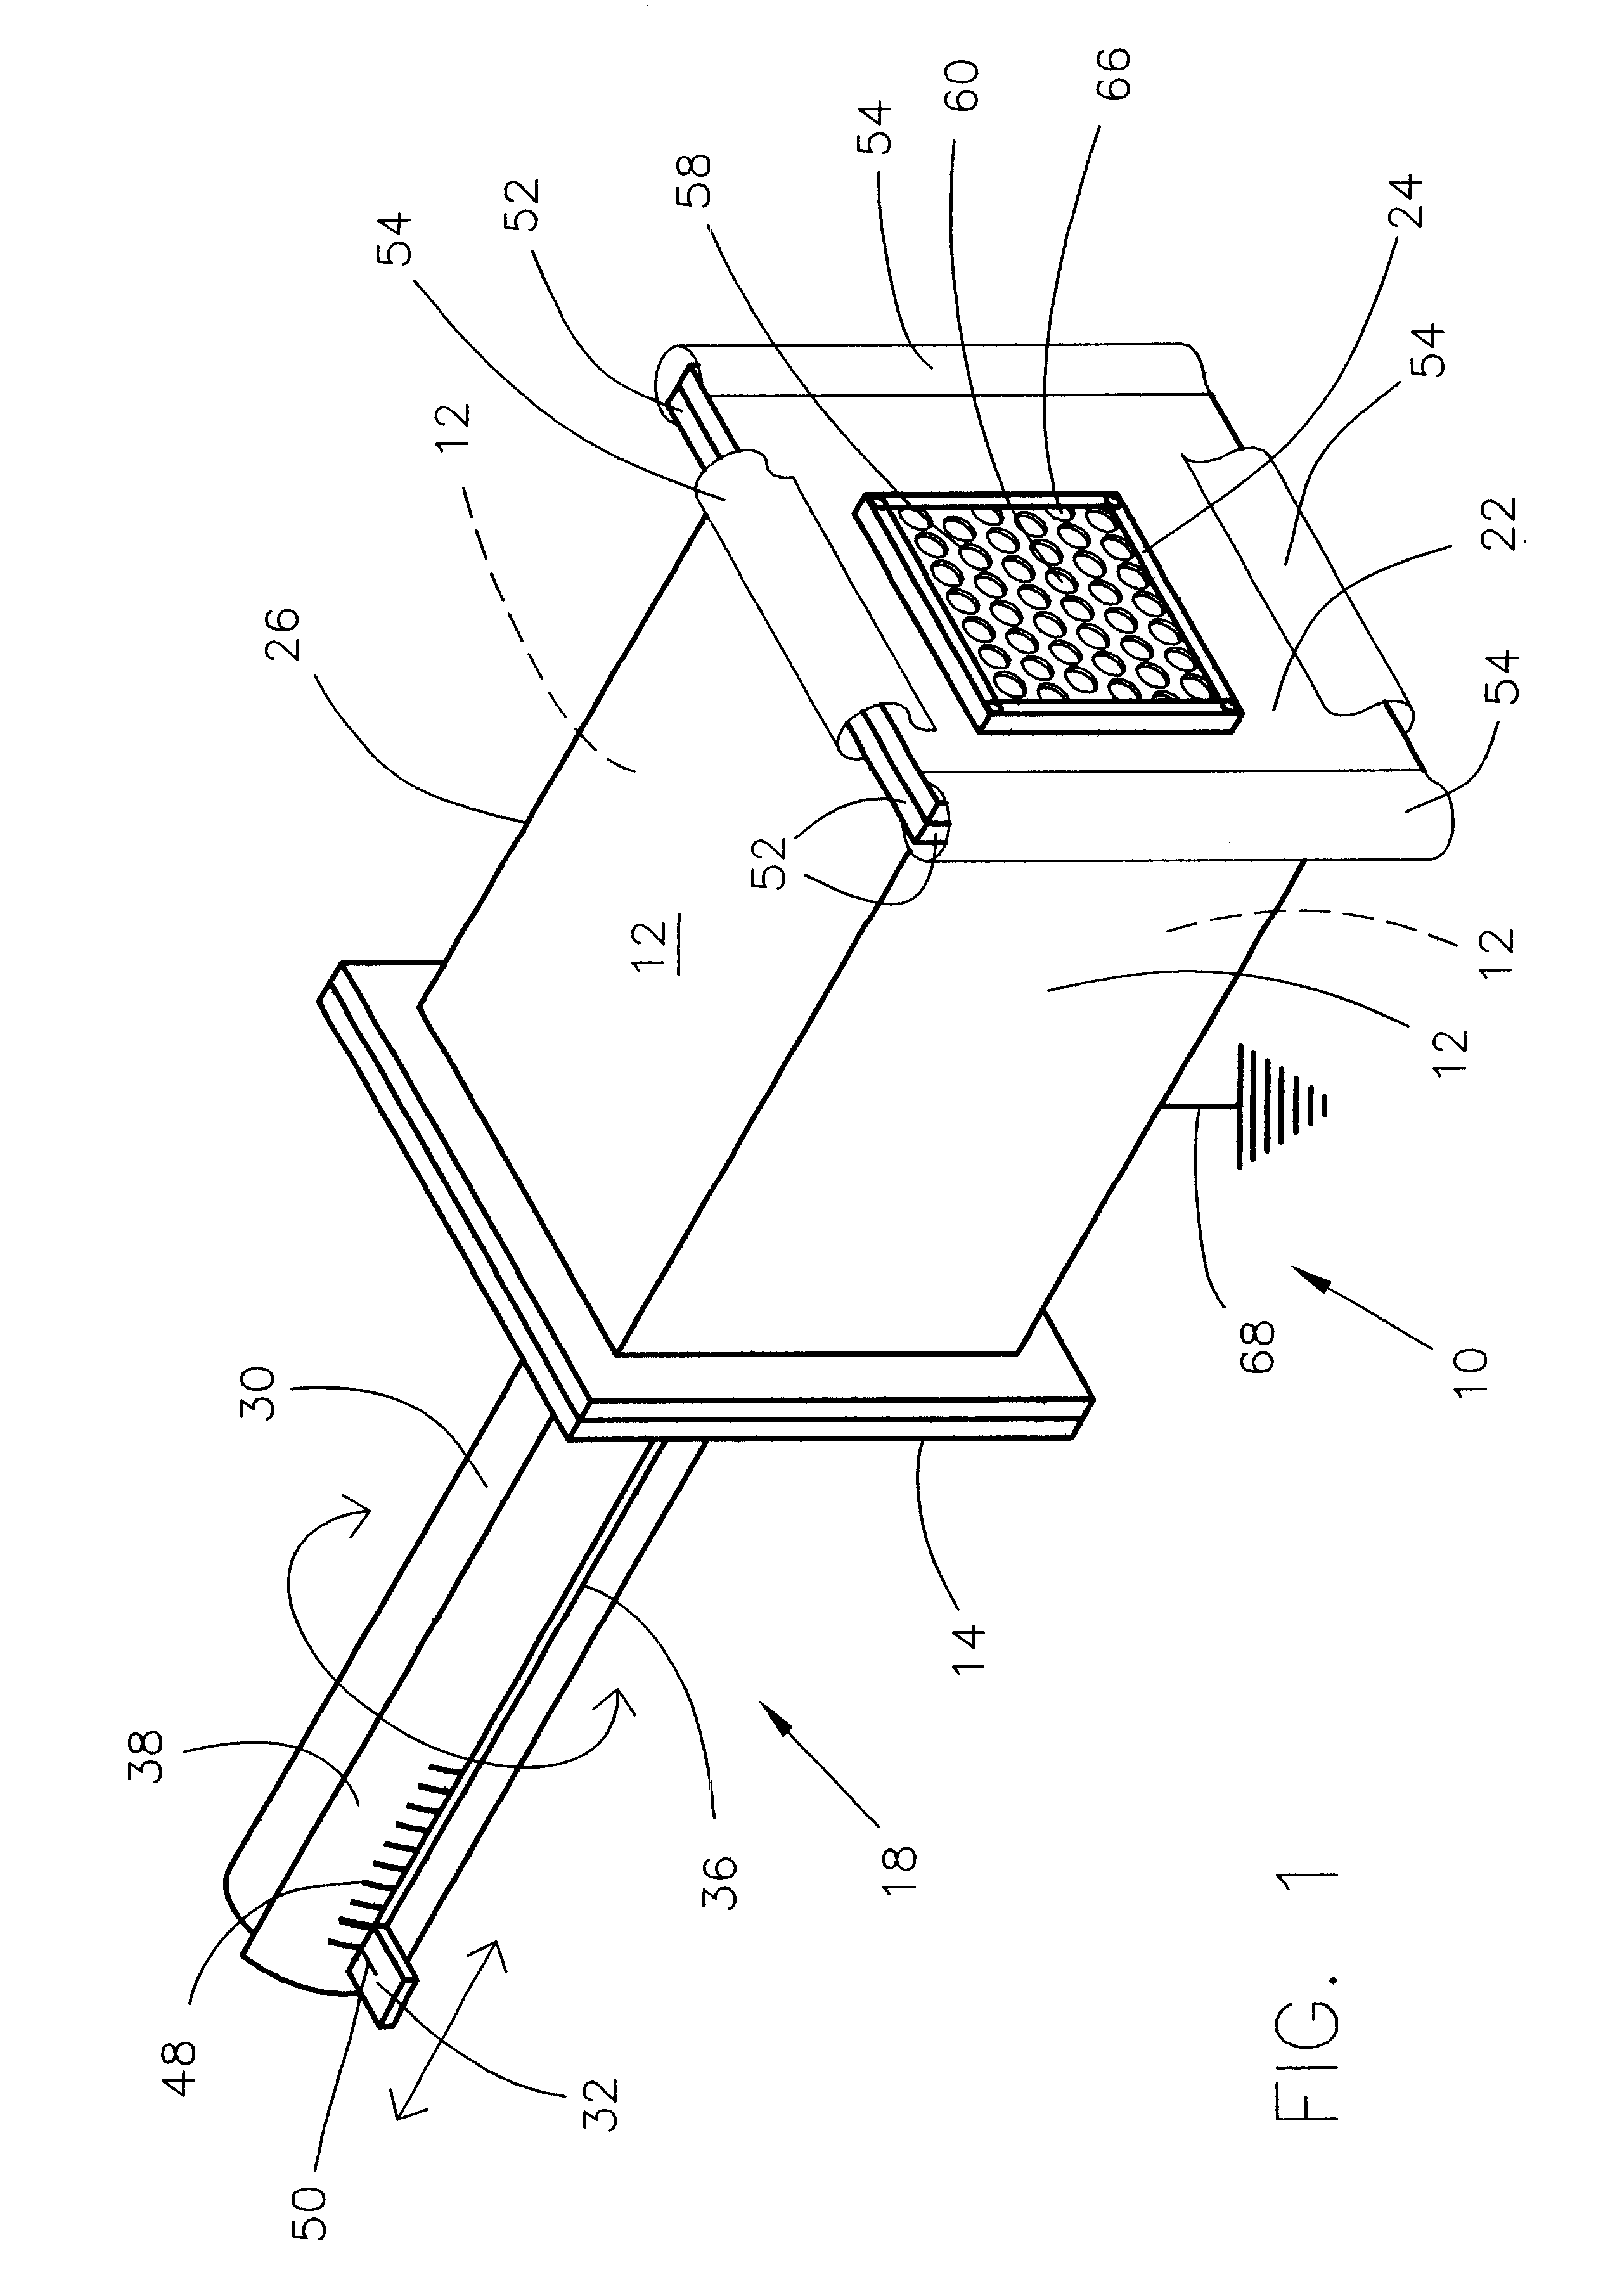 Apparatus for testing various structural parameters of an electro-magnetic radiation barrier